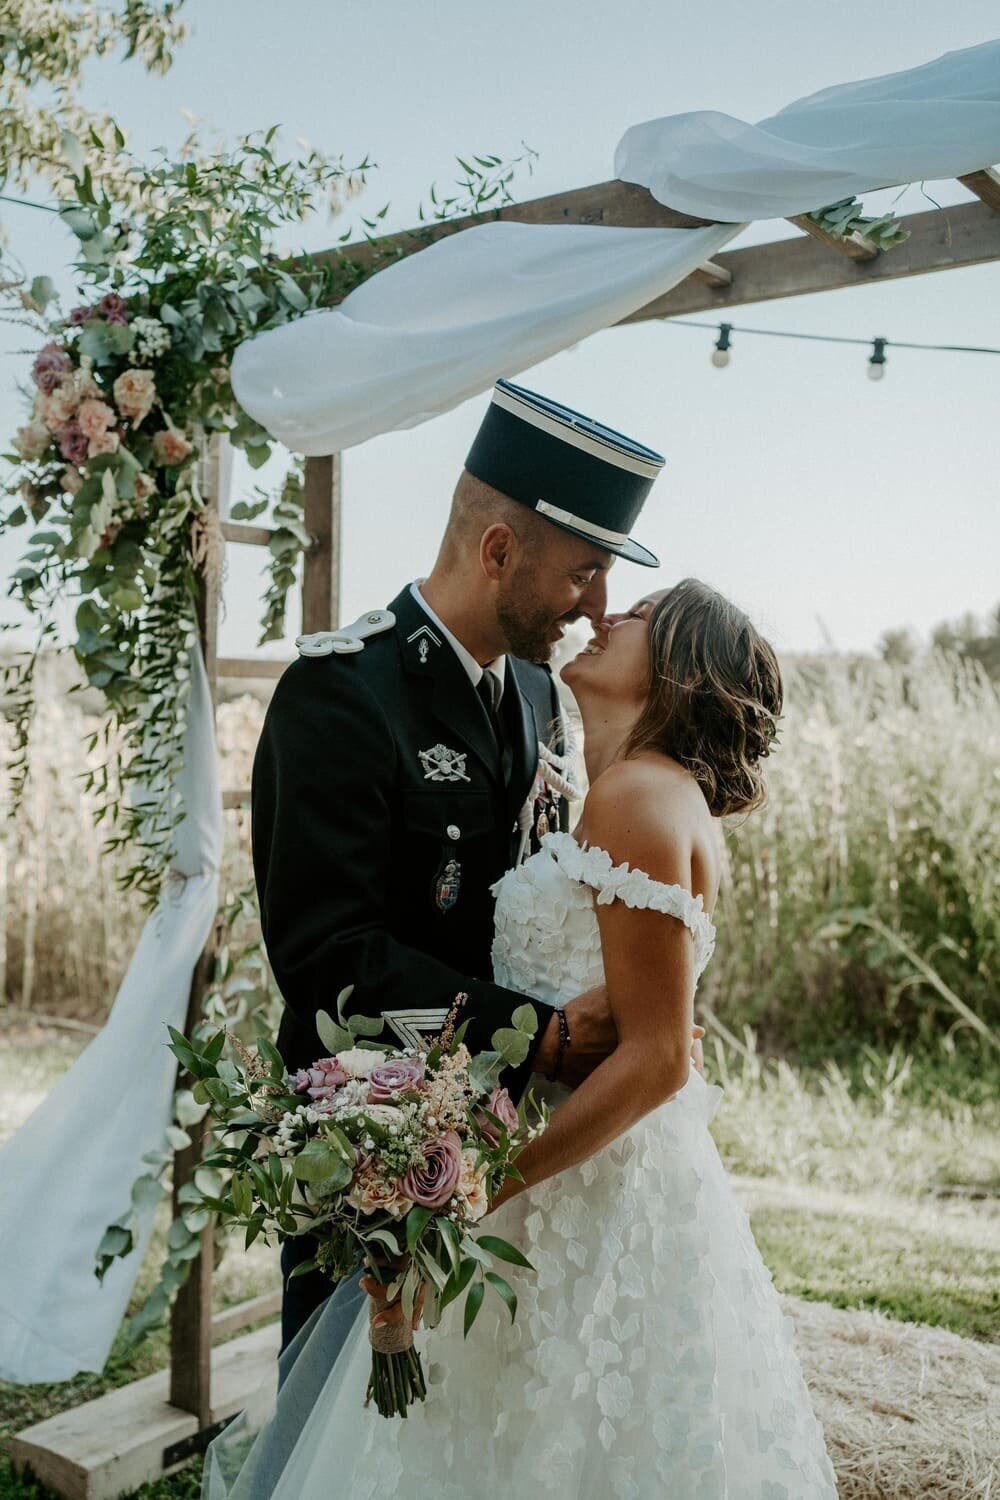 Mariage-militaire-provence2